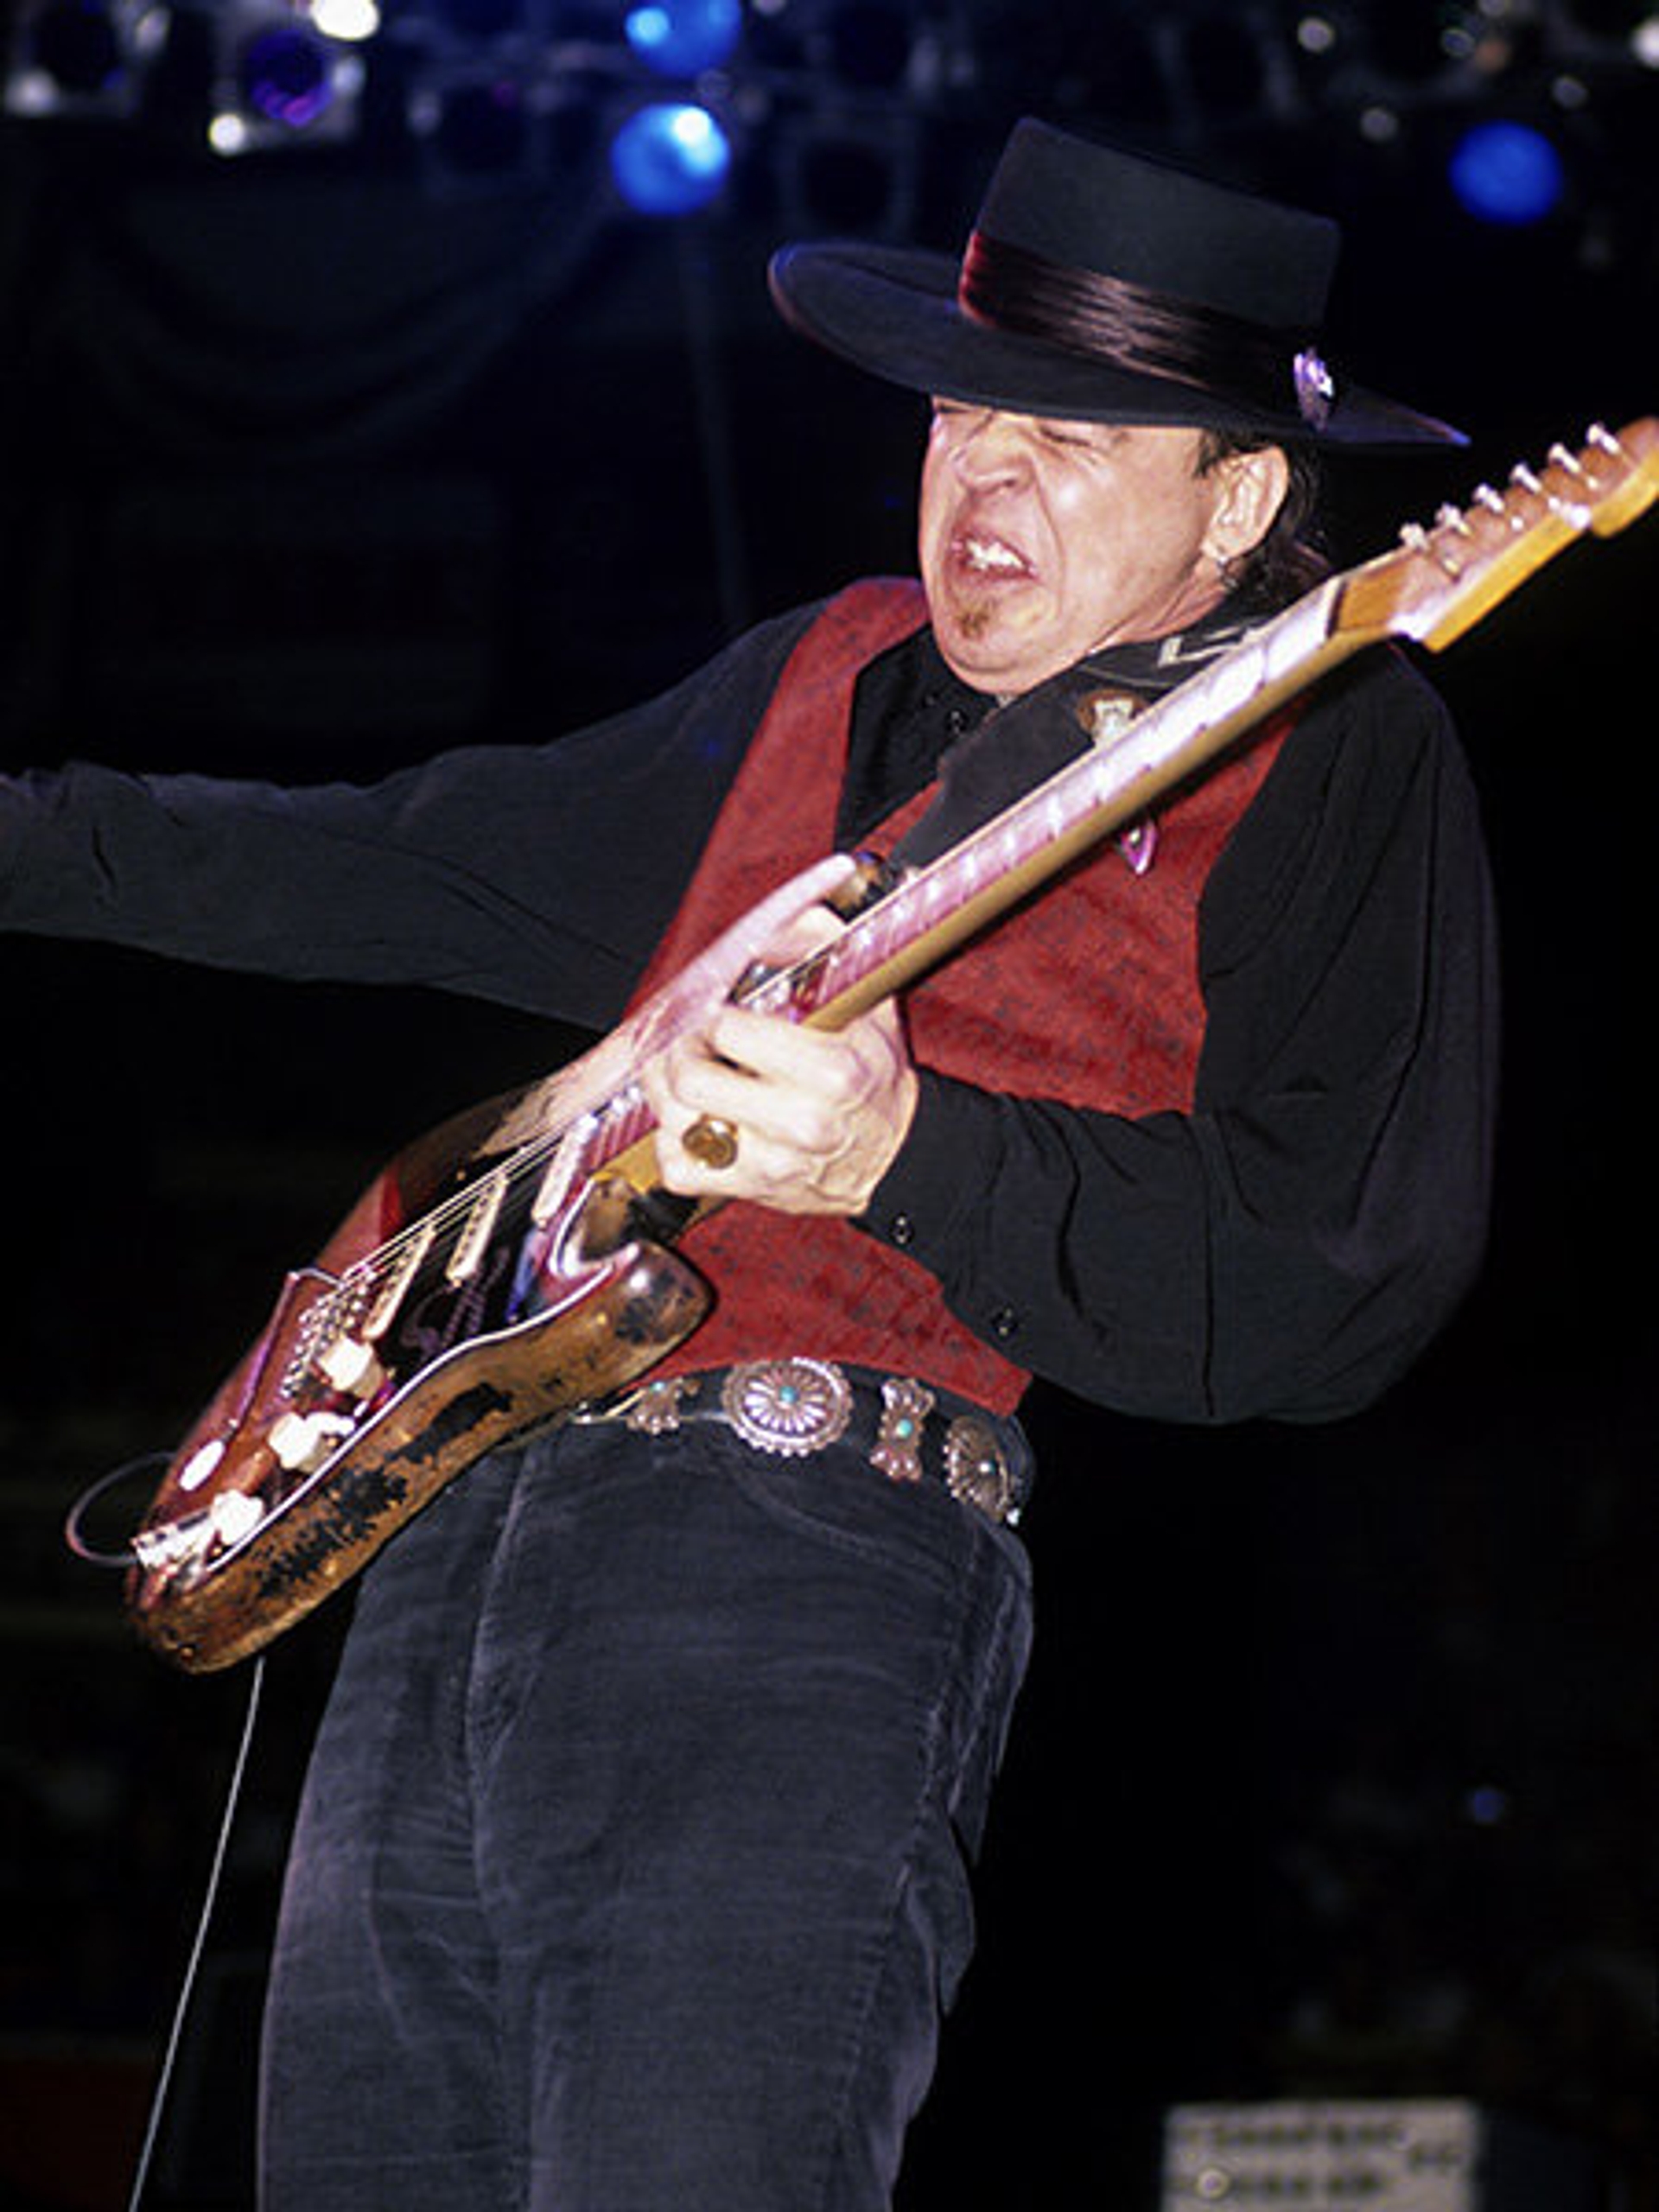 funny-guitar-playing-faces-stevie-ray-vaughan-billboard-450